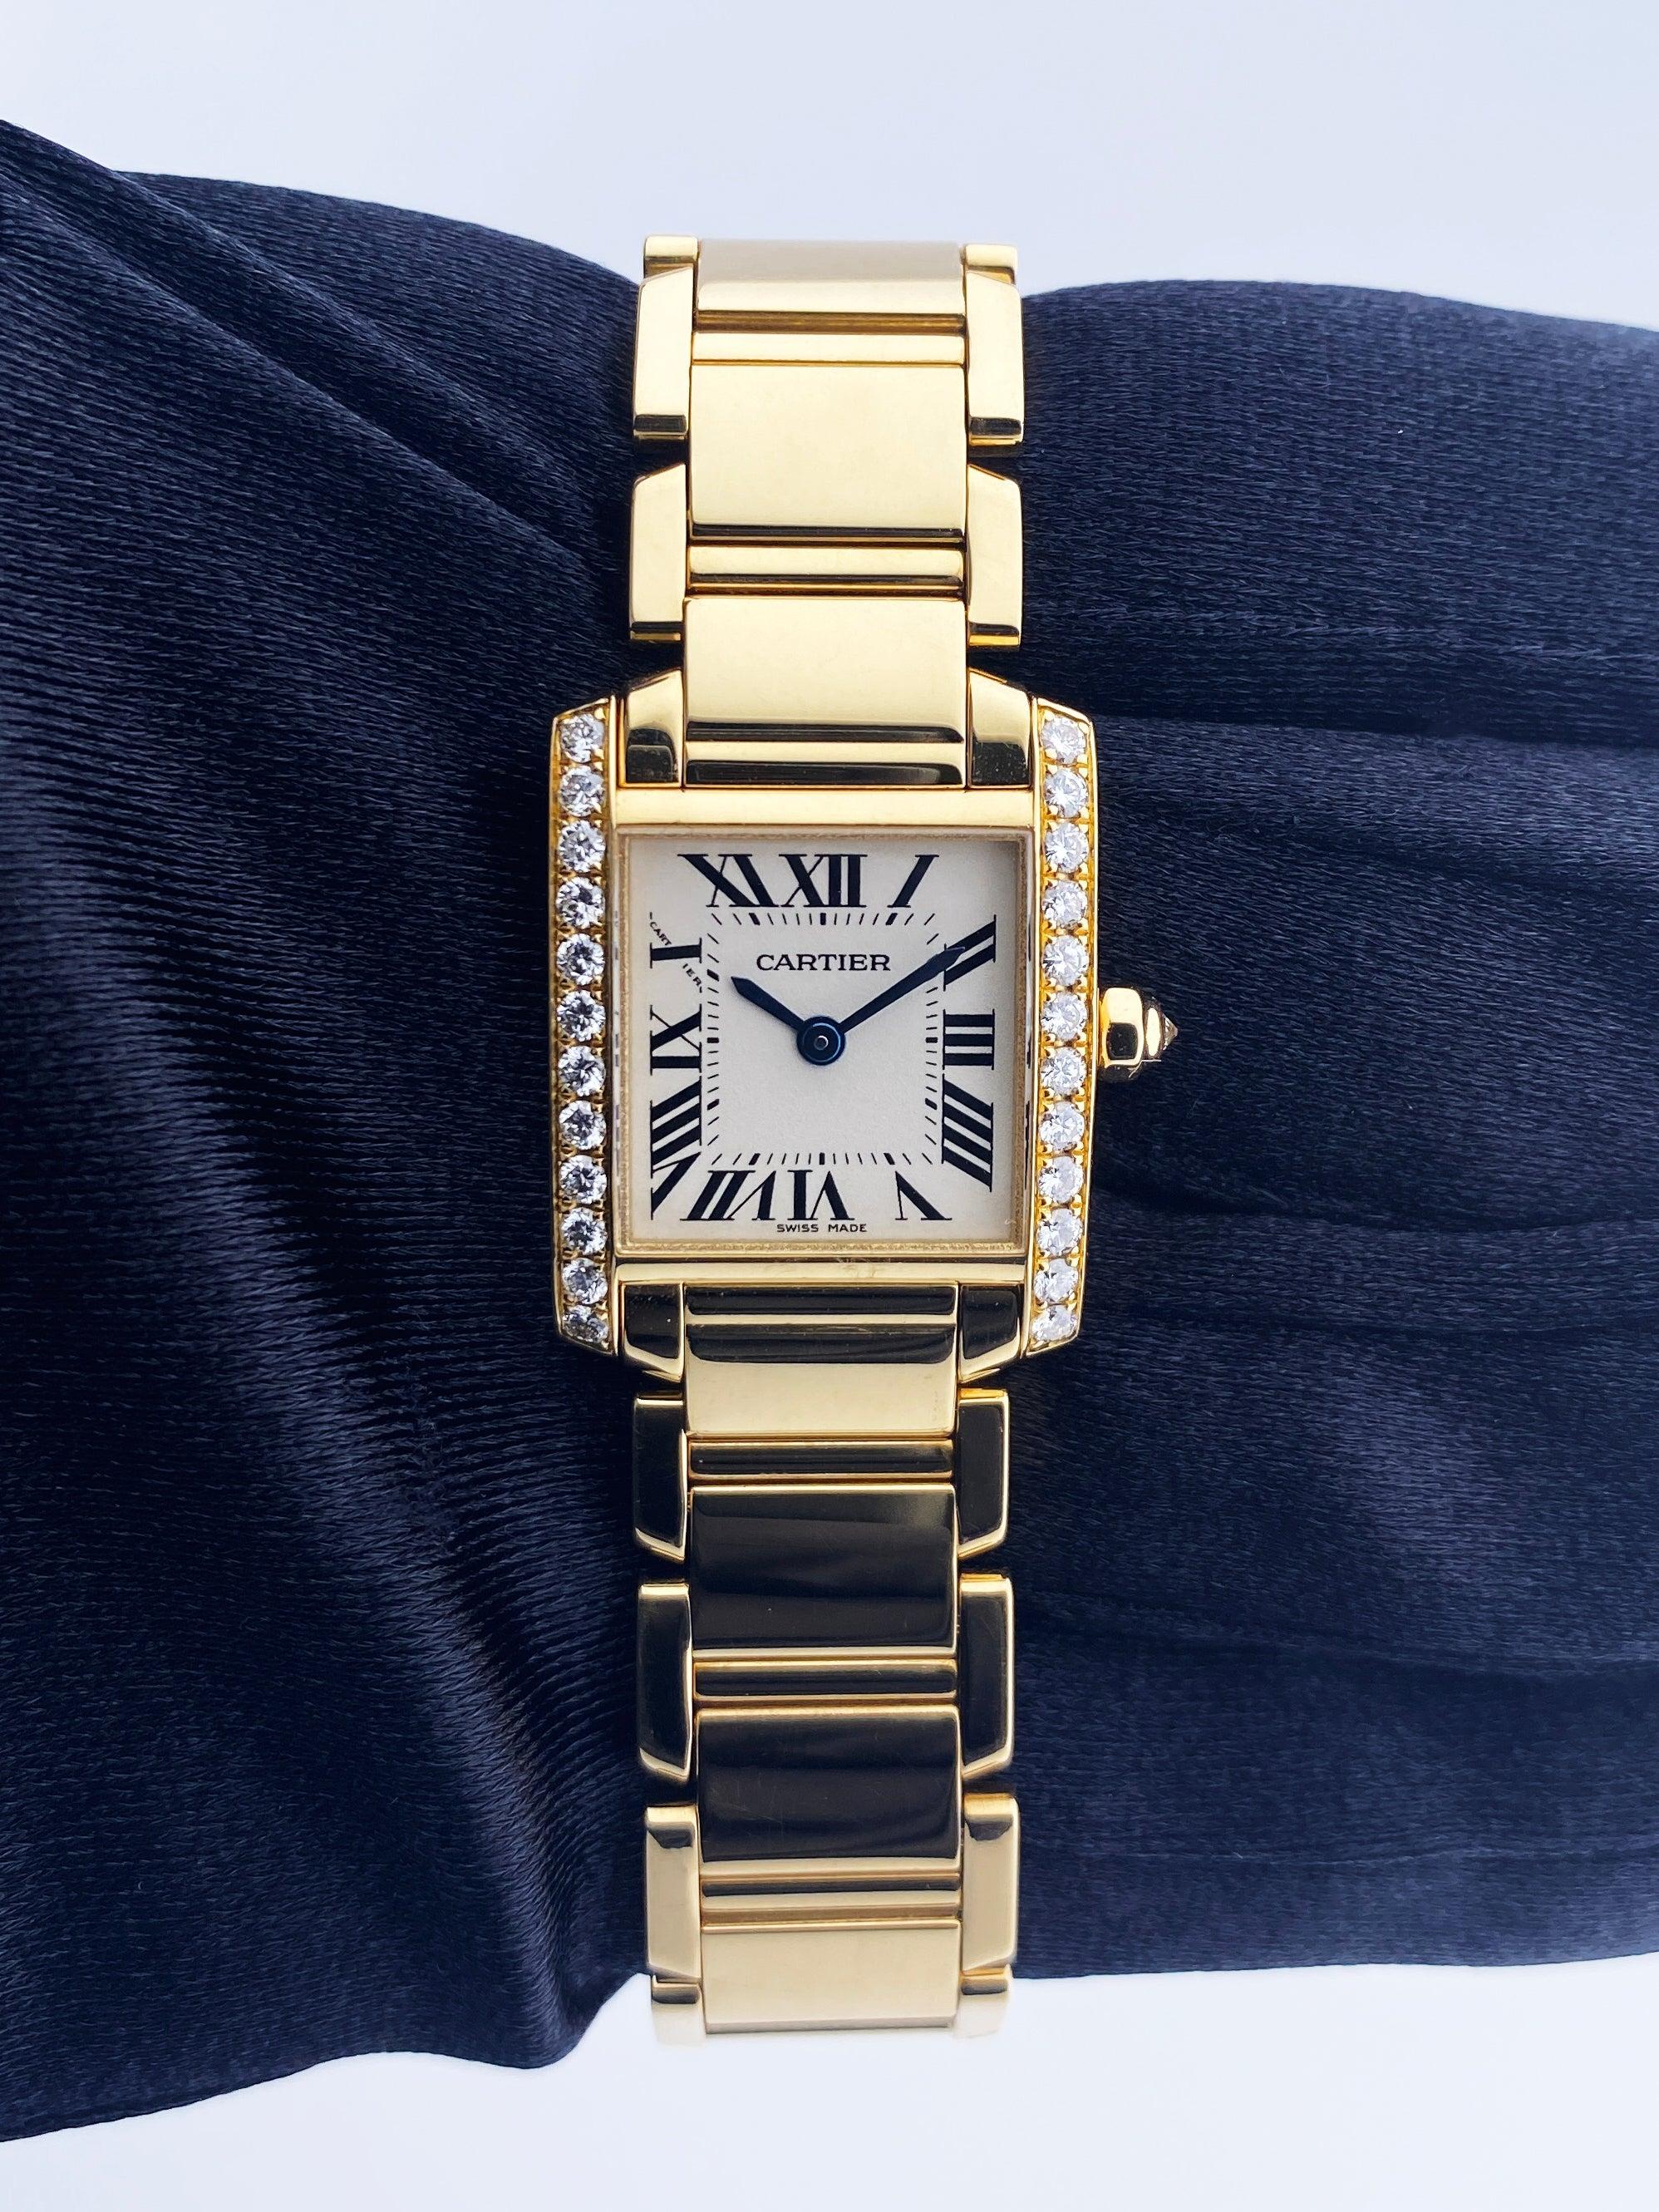 Cartier Tank Francaise 2385 Ladies Watch. 20mm 18k yellow gold case. 18K yellow gold bezel with original factory diamond set insert. Off-White dial with Blue steel hands and Roman numeral hour markers. Minute markers on the inner dial. 18K yellow